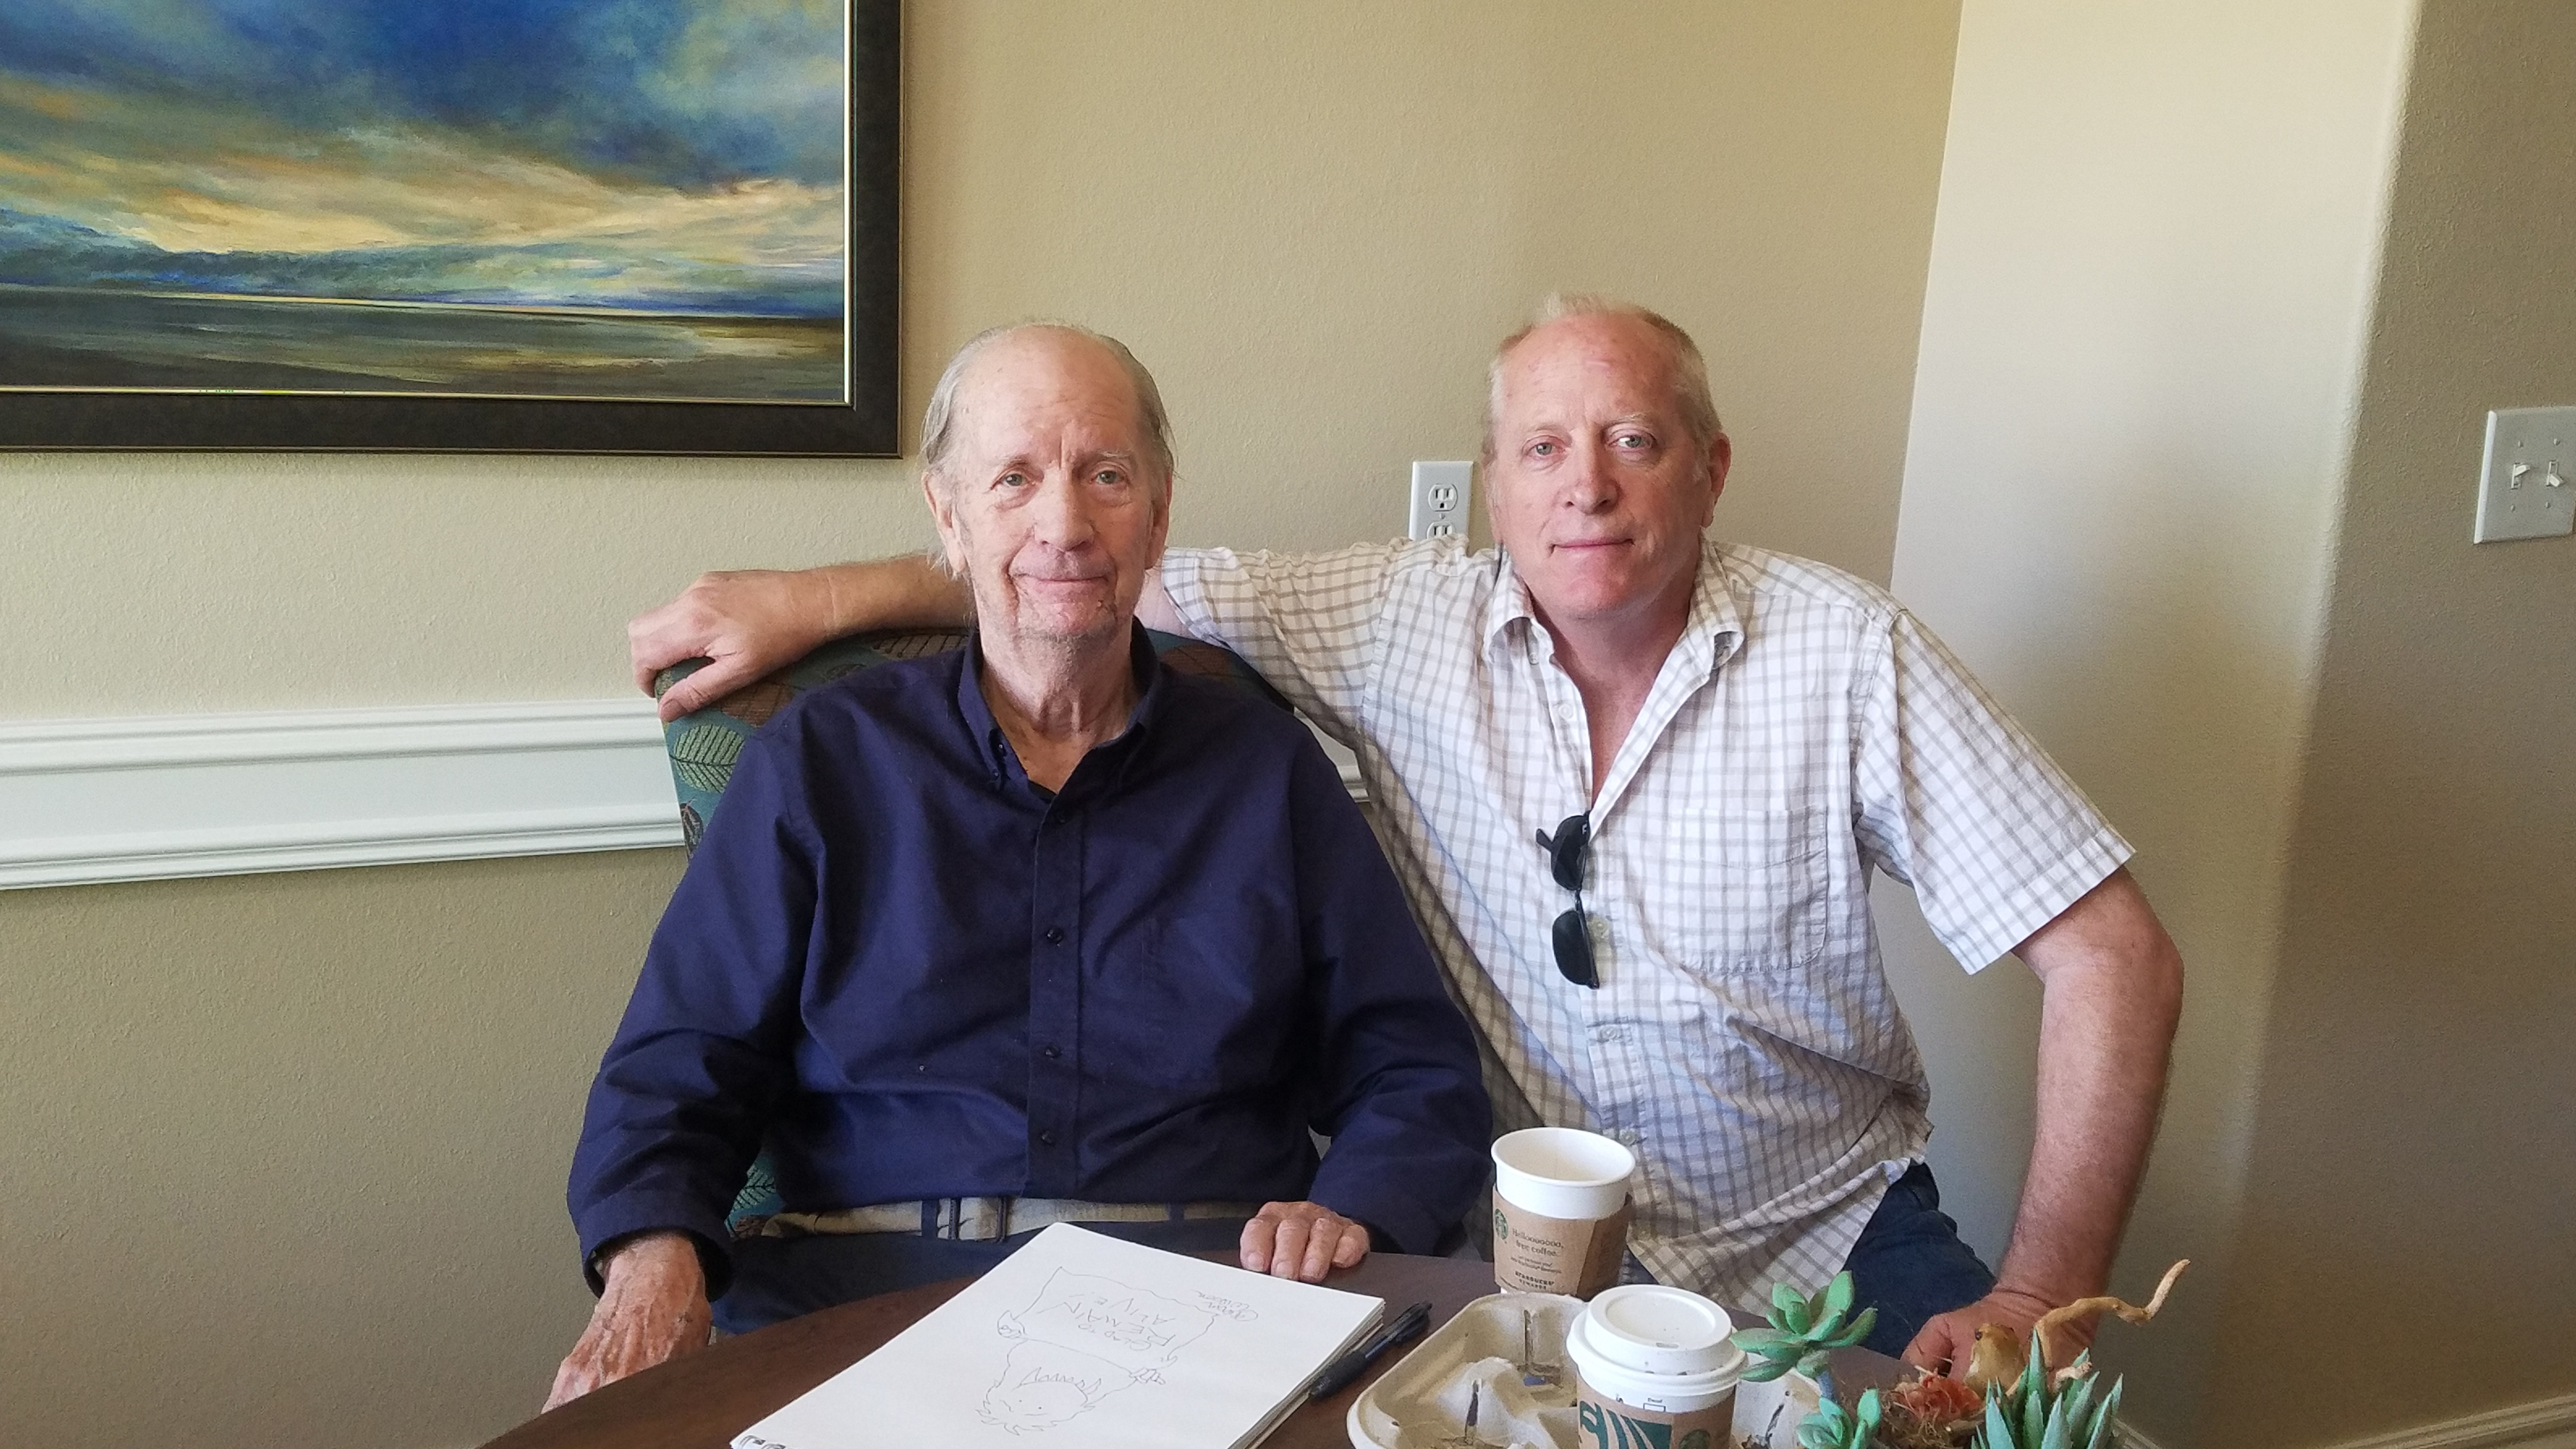 Gahan Wilson earlier this year with his stepson, Paul Winters, at the memory care facility in Arizona.